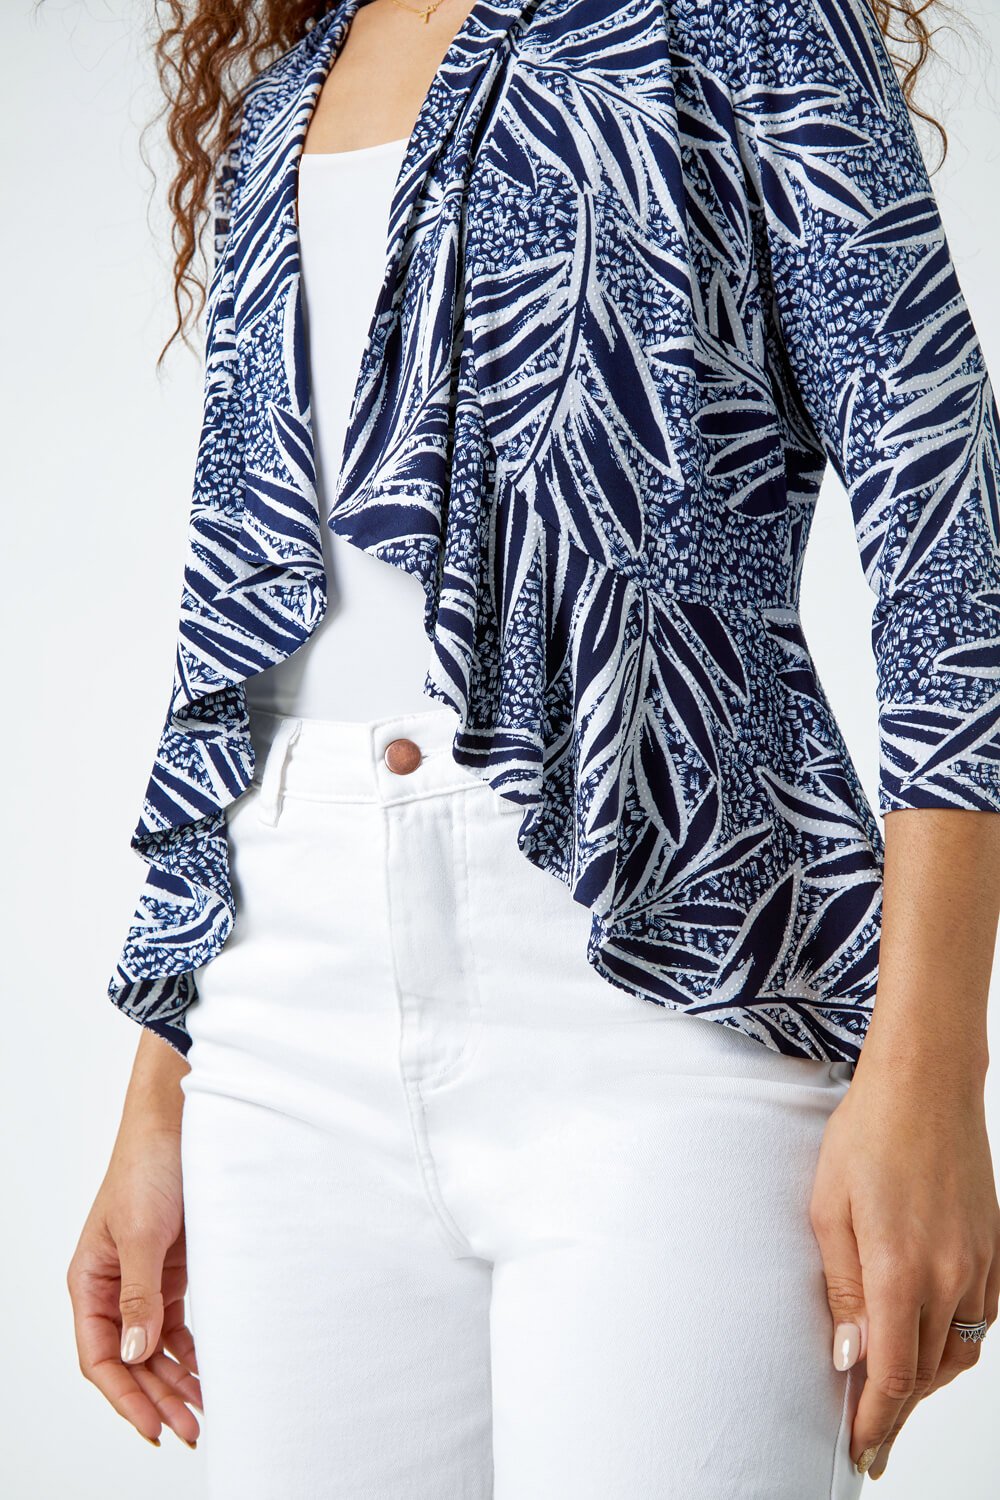  Textured Floral Print Peplum Stretch Jacket, Image 5 of 5